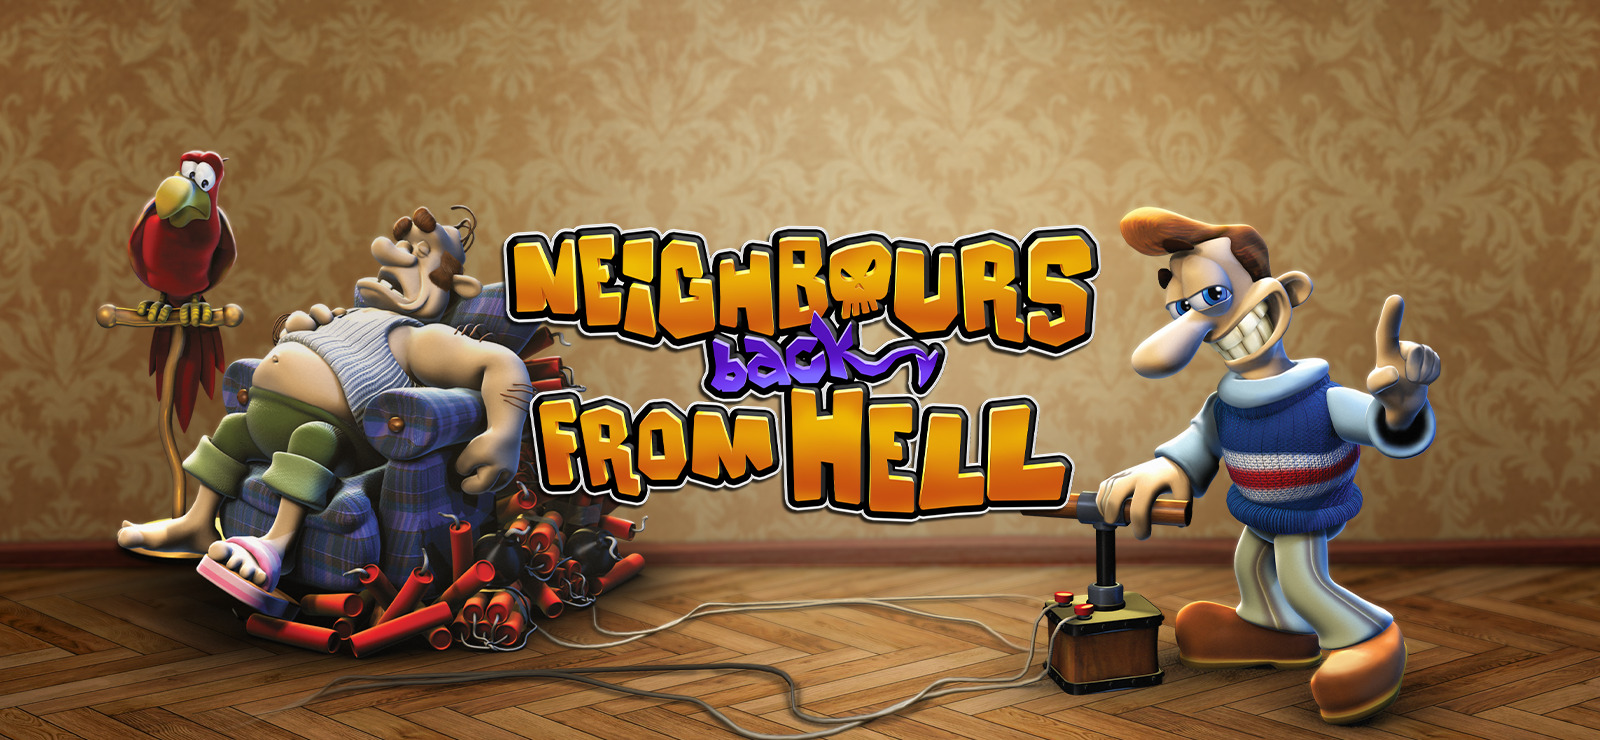 neighbors from hell